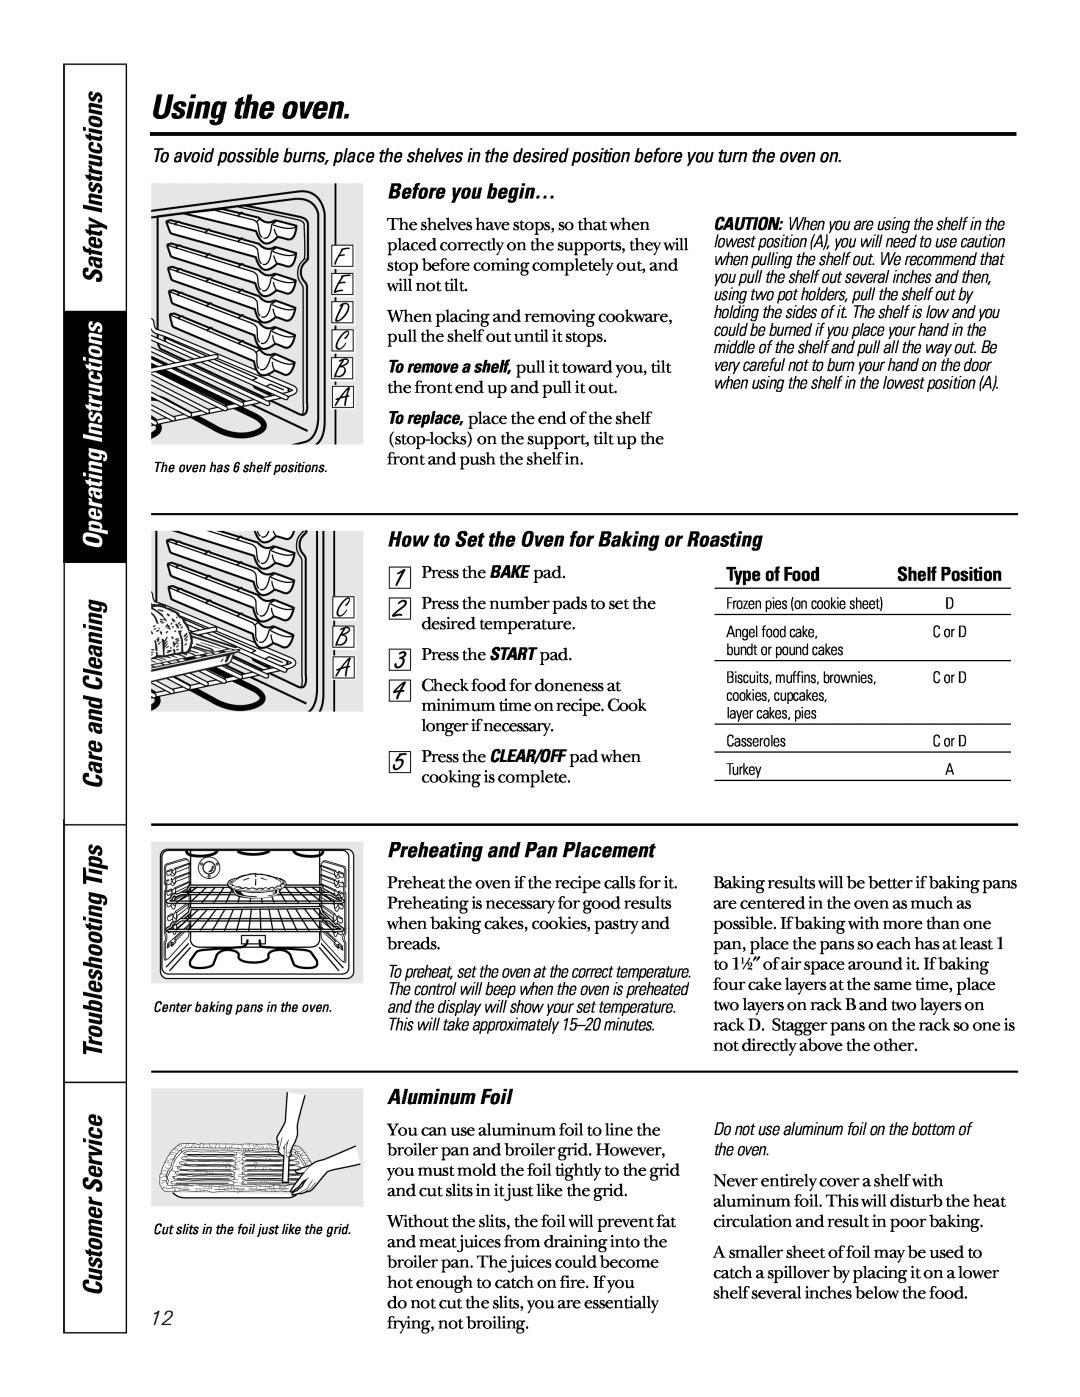 GE JBP79 Instructions, Troubleshooting Tips, Before you begin…, Preheating and Pan Placement, Aluminum Foil, Safety 